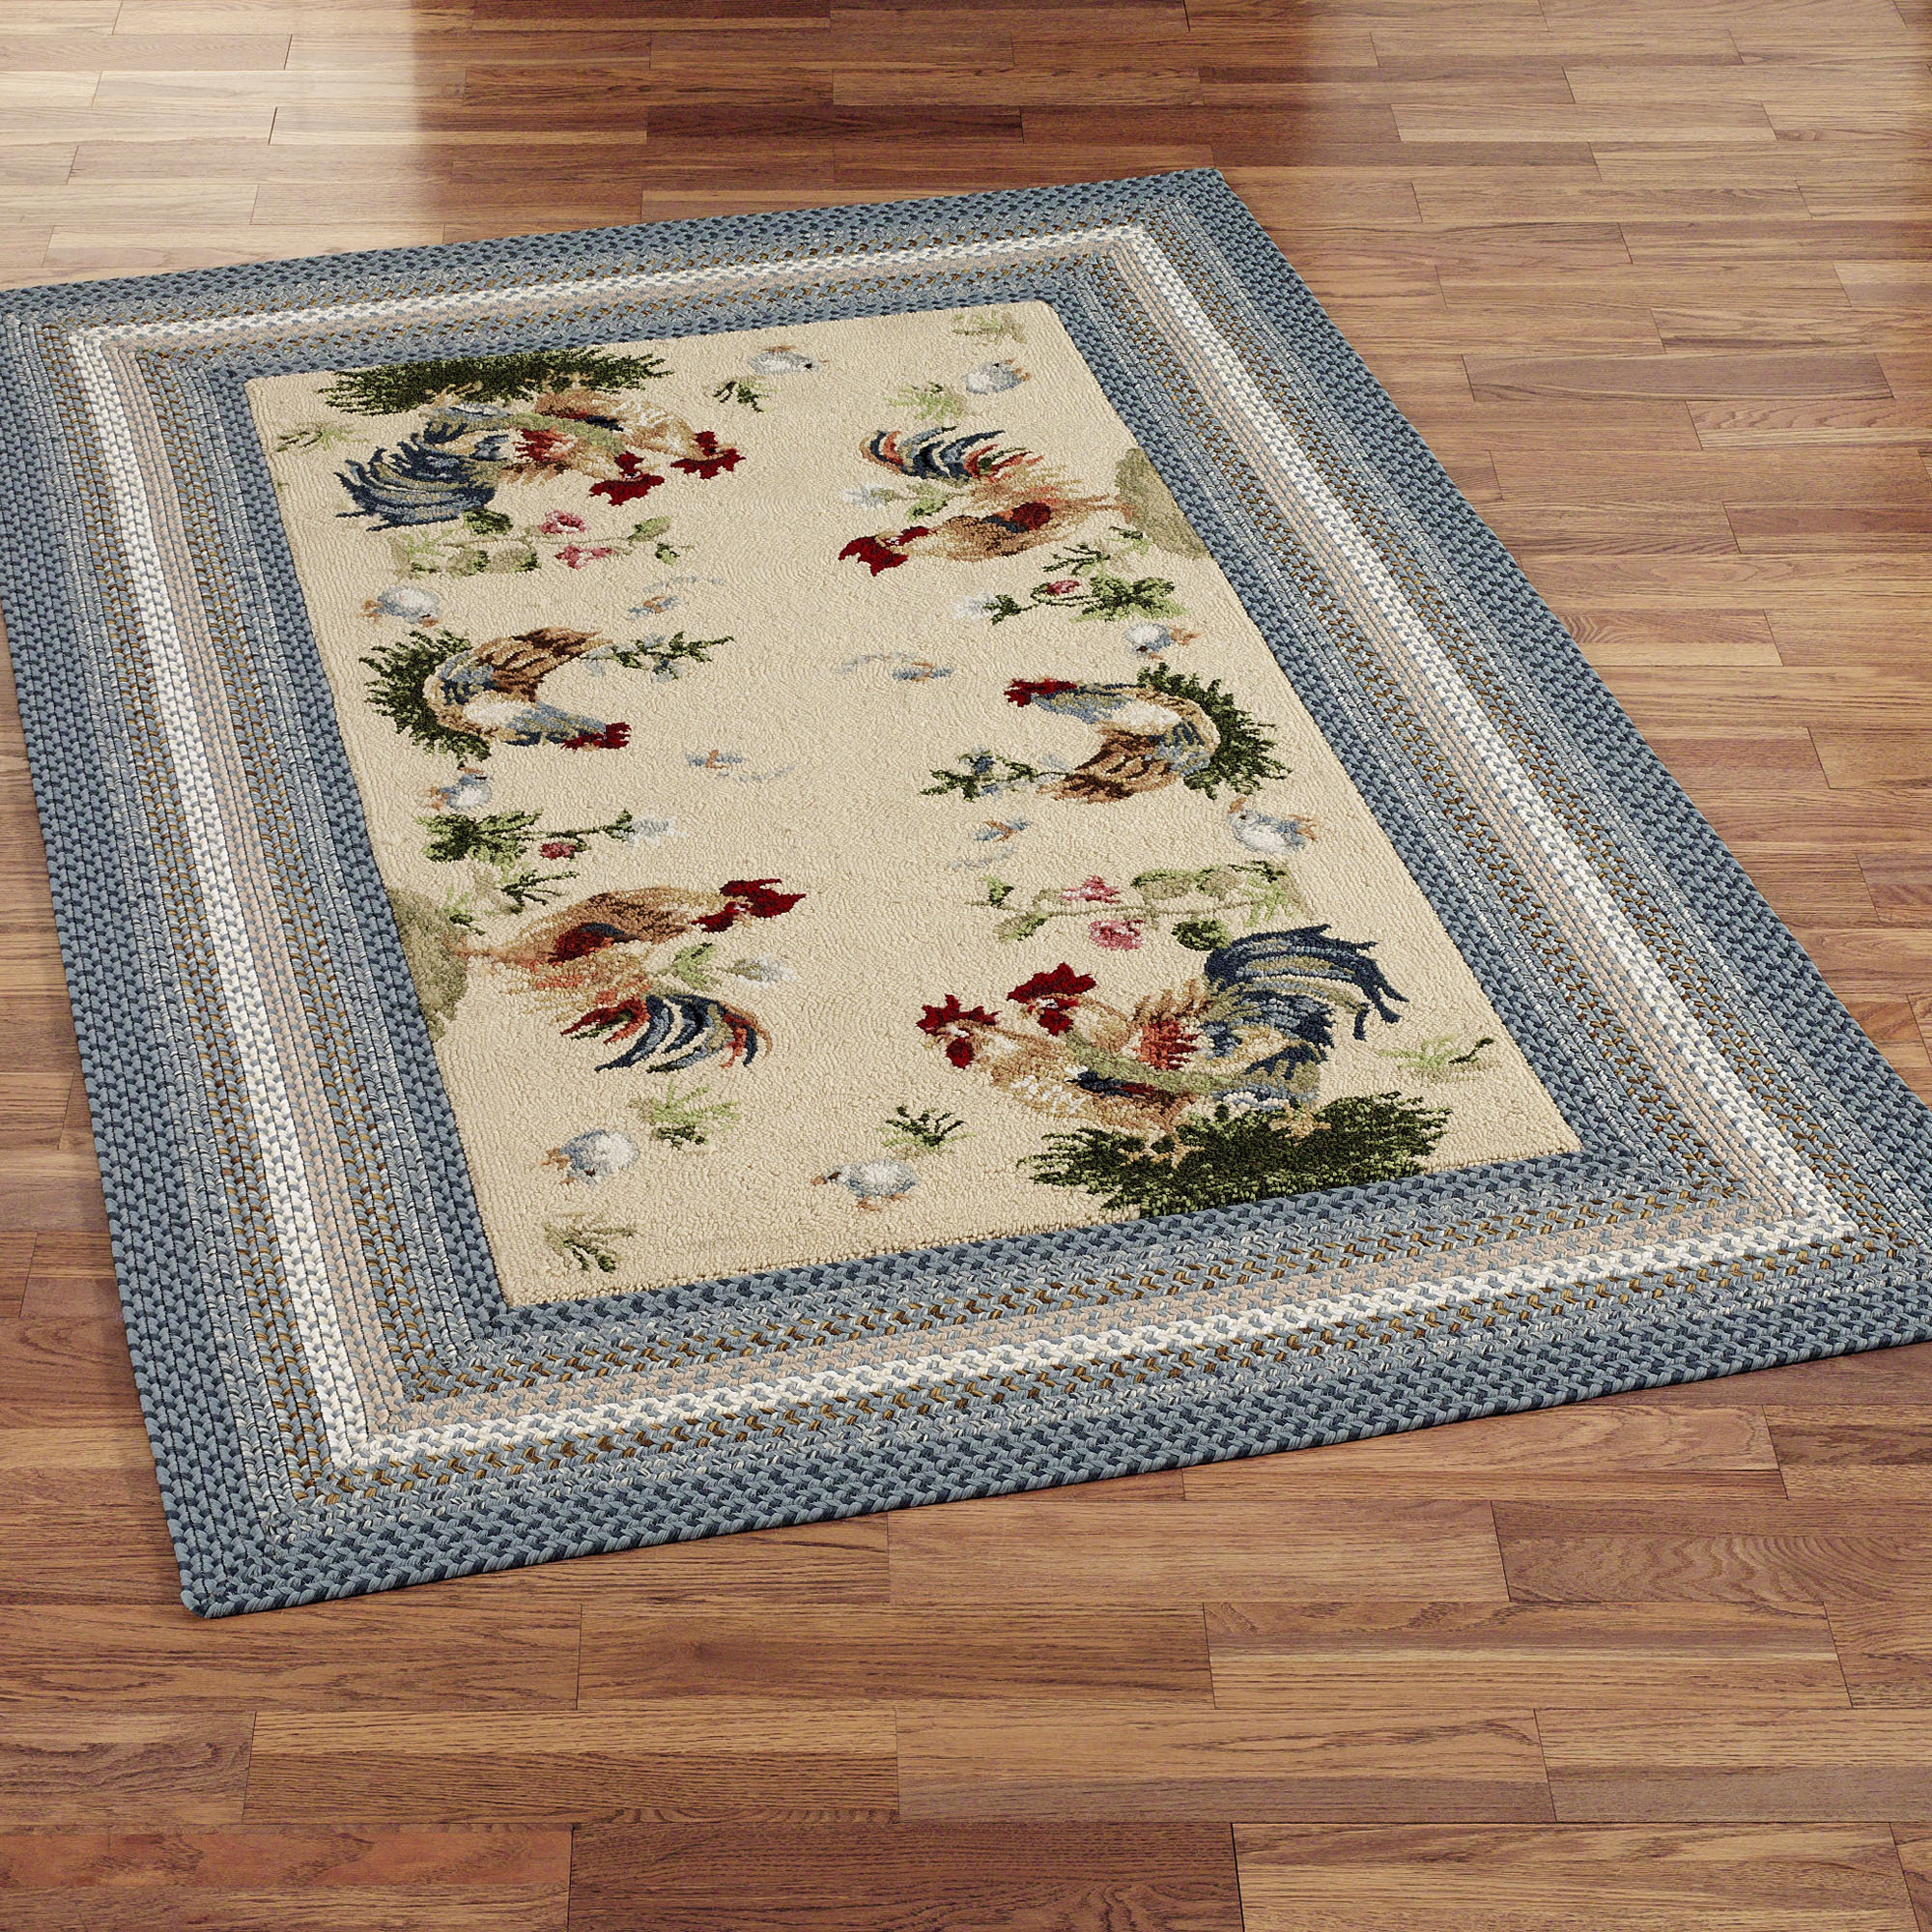 french country kitchen rugs photo - 4